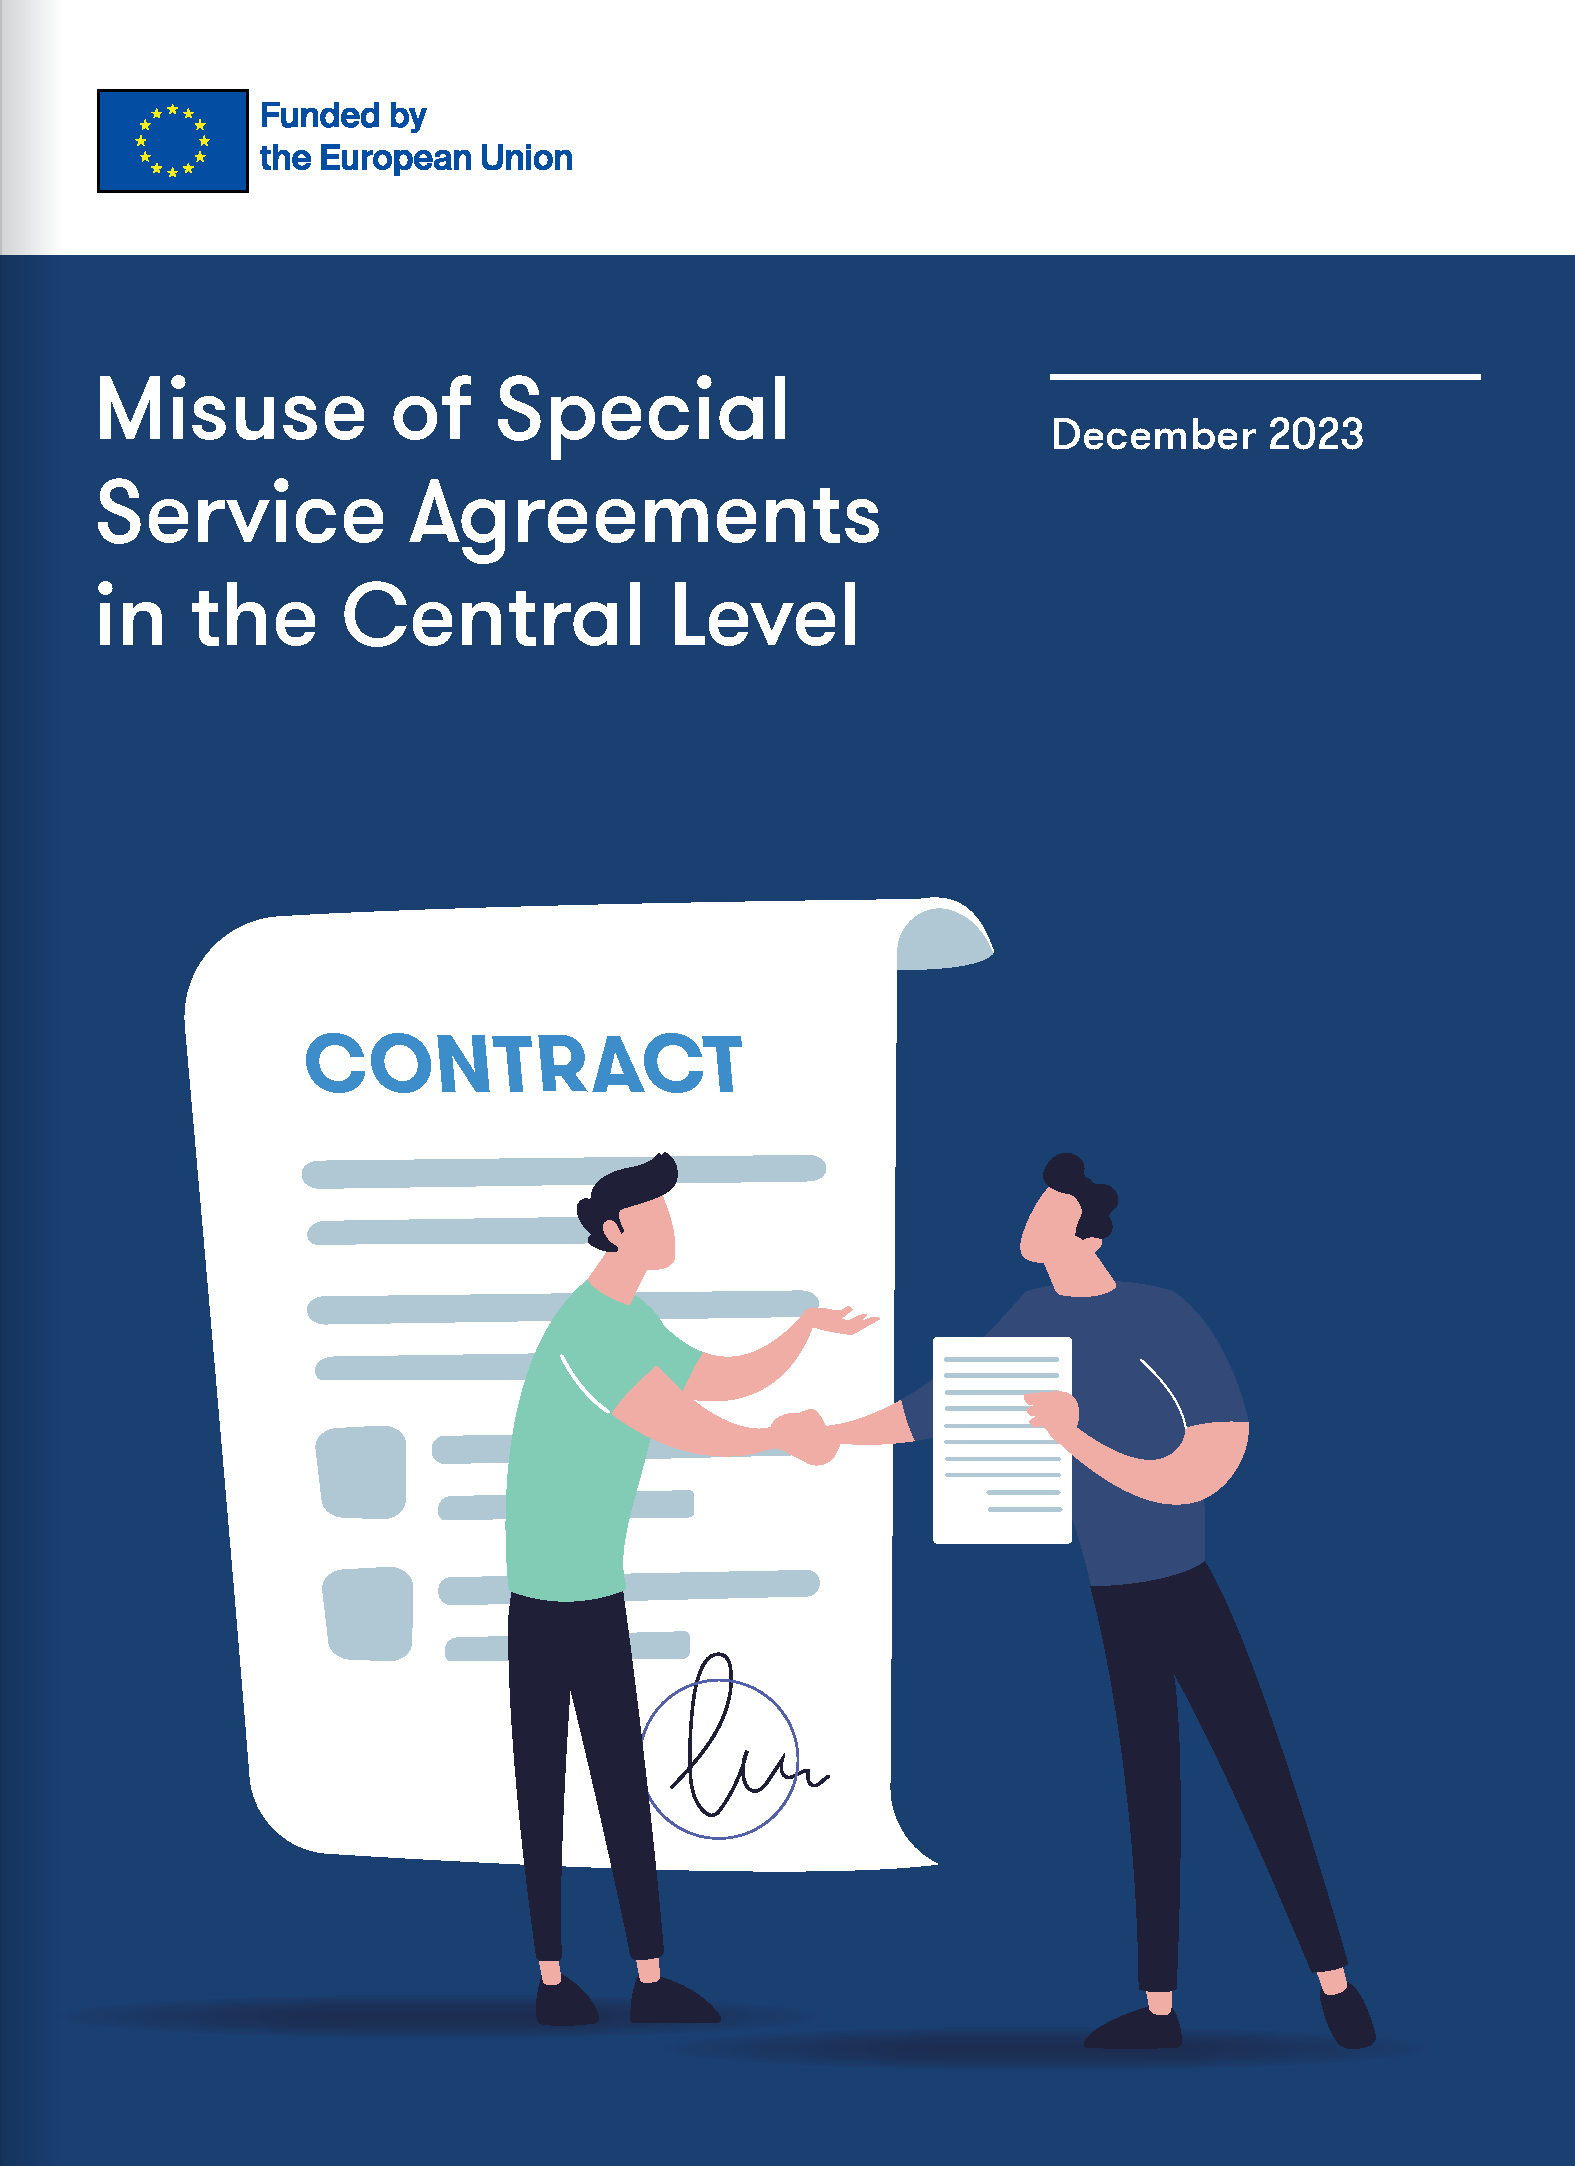 Misuse of Special Service Agreements in the Central Level